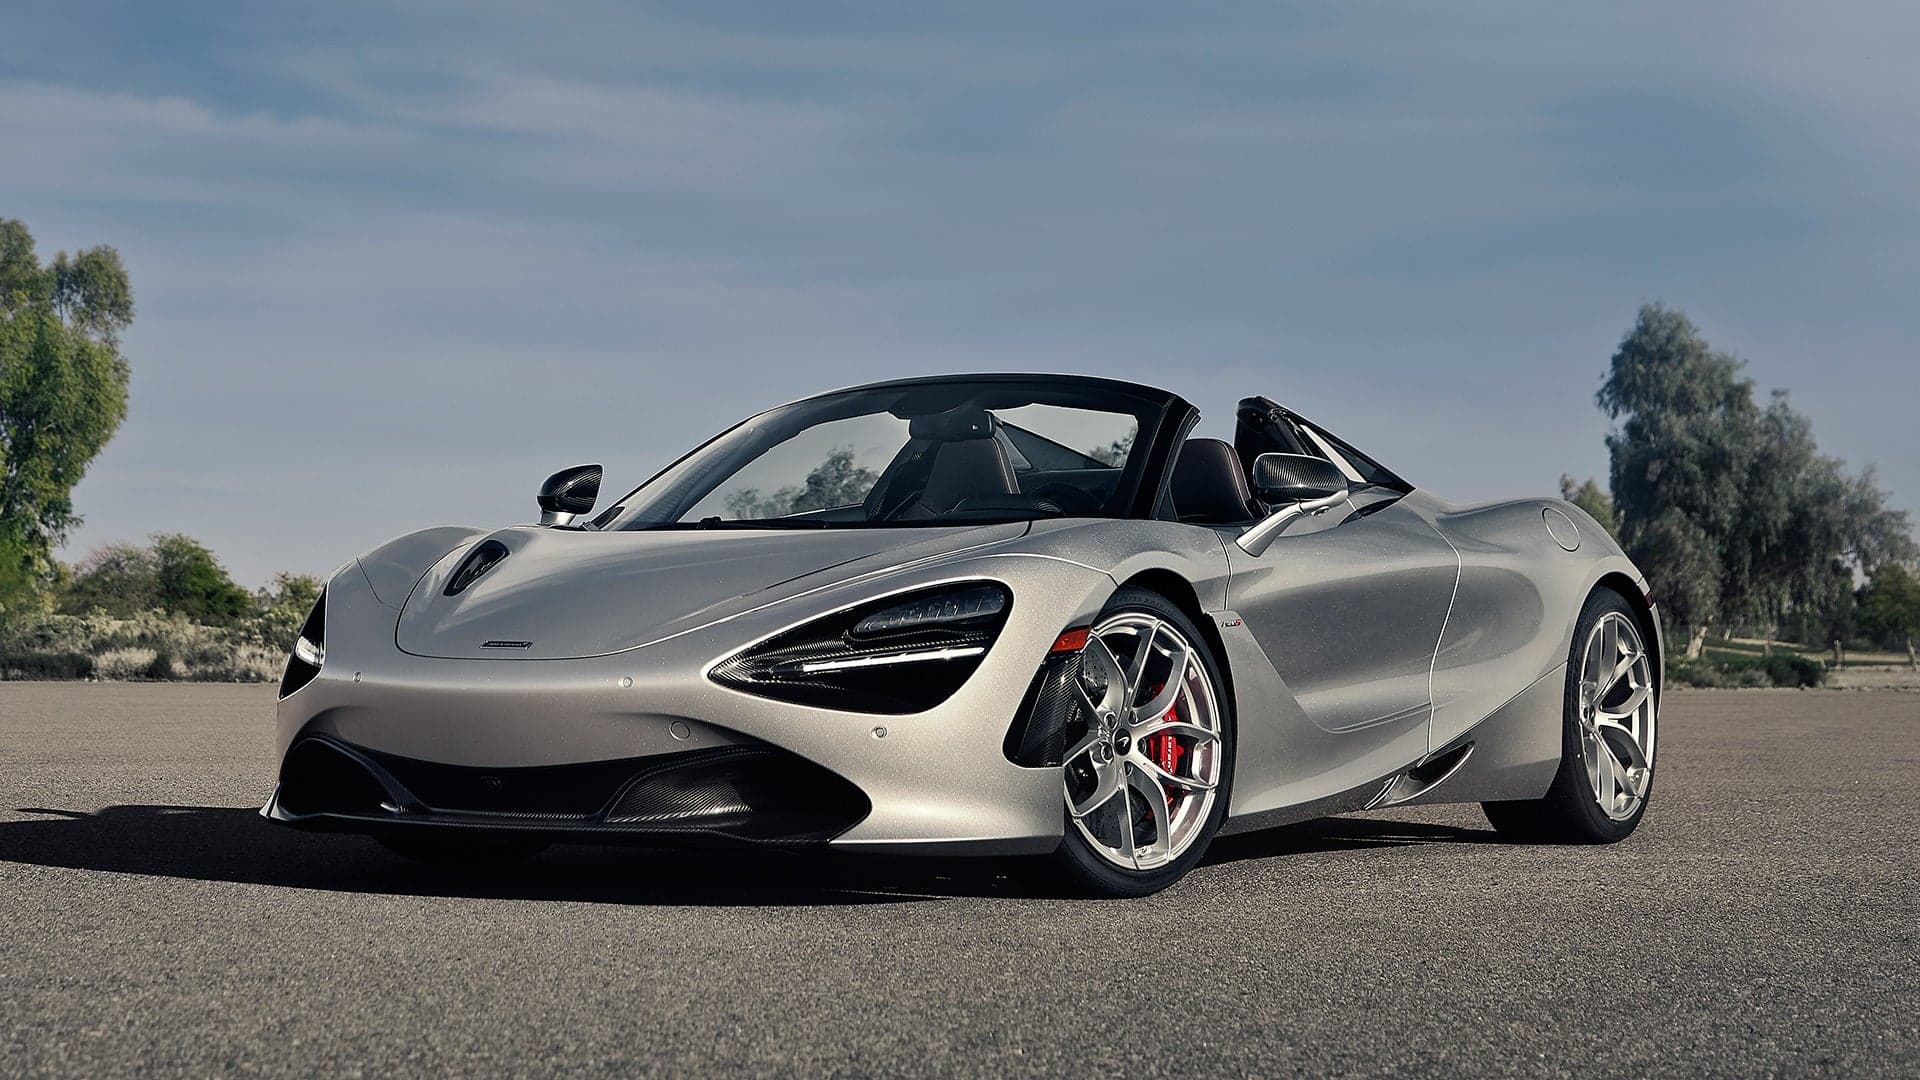 2019 McLaren 720S Spider First Drive: A Supercar Roadster Worth the Whole Wedding Registry